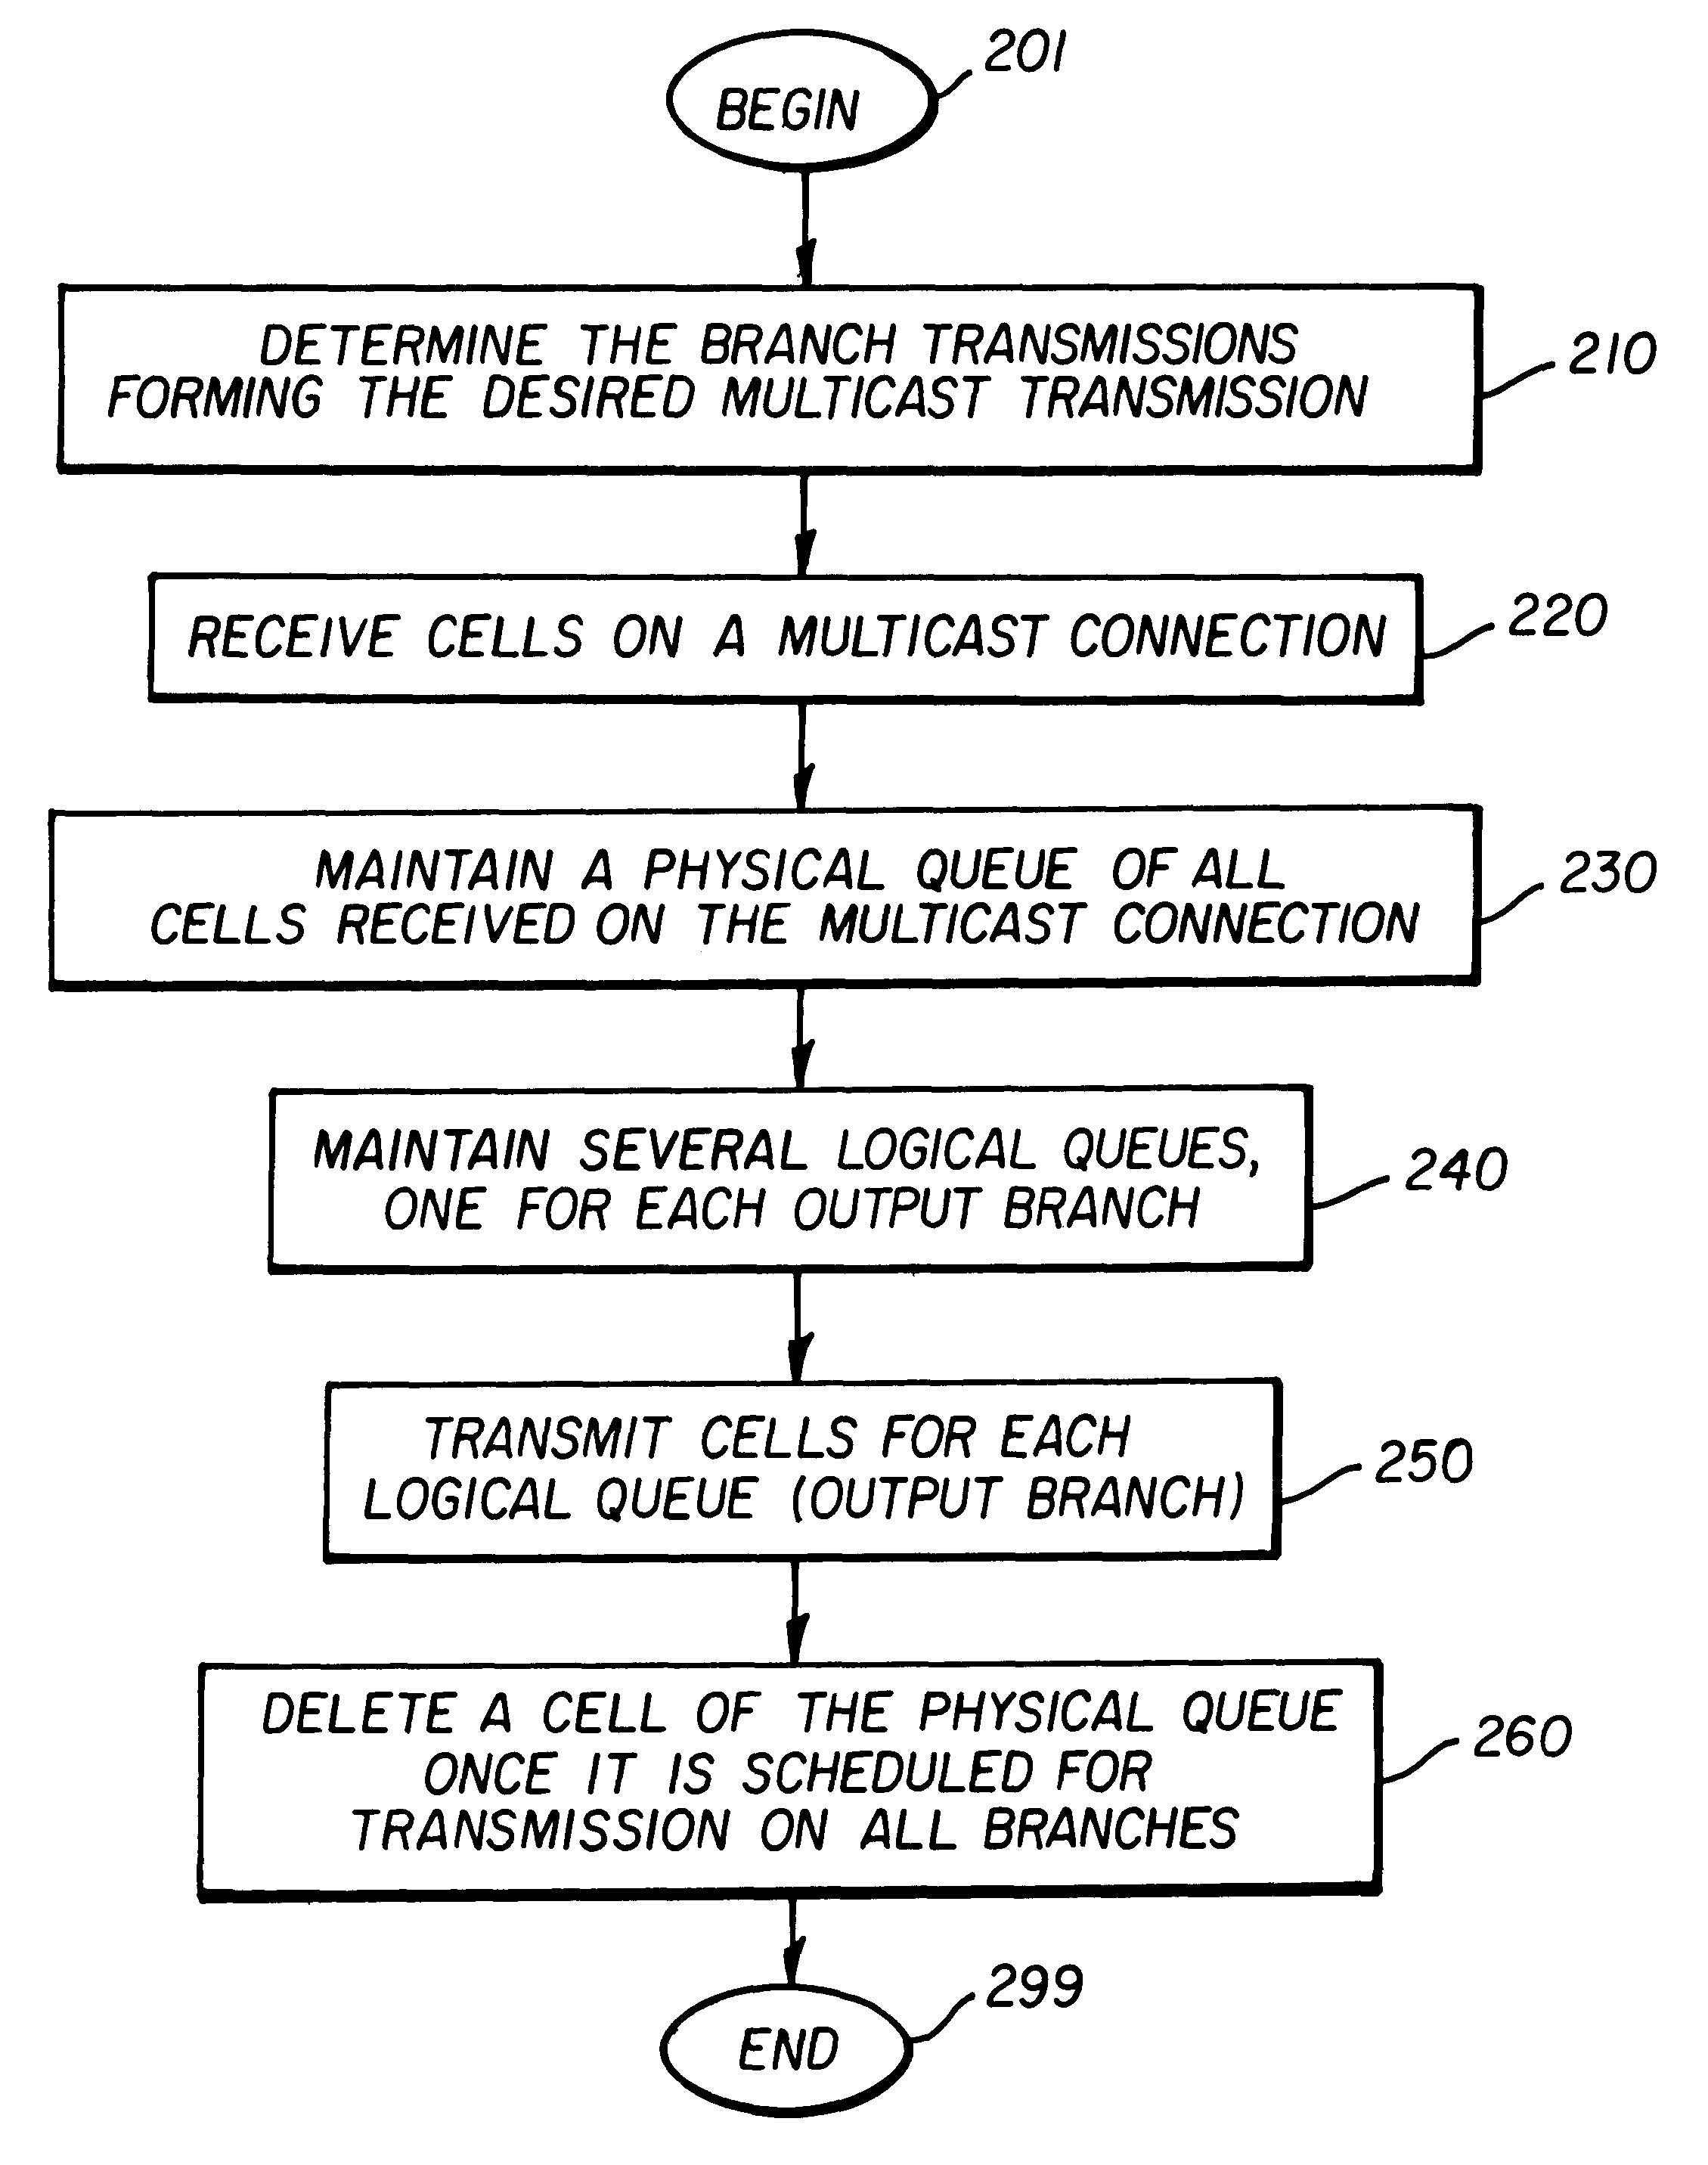 Queue management with support for multicasts in an asynchronous transfer mode (ATM) switch